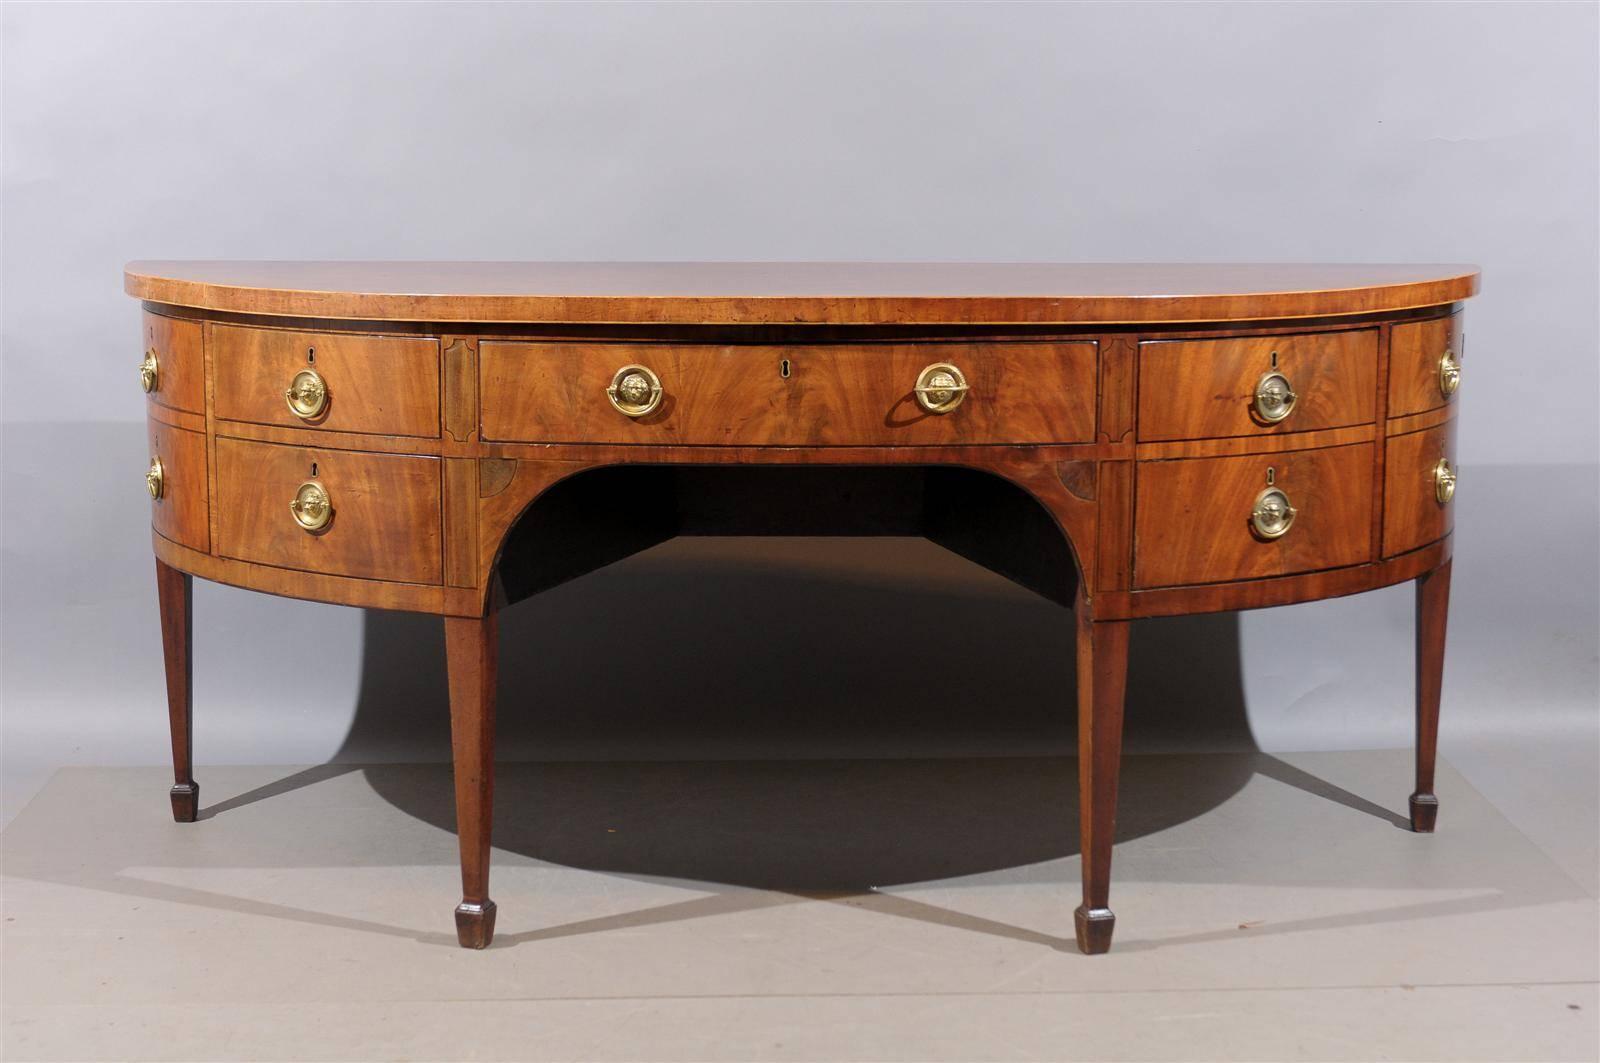 Large early 19th century English D-shaped sideboard in faded mahogany with inlay and spade feet.